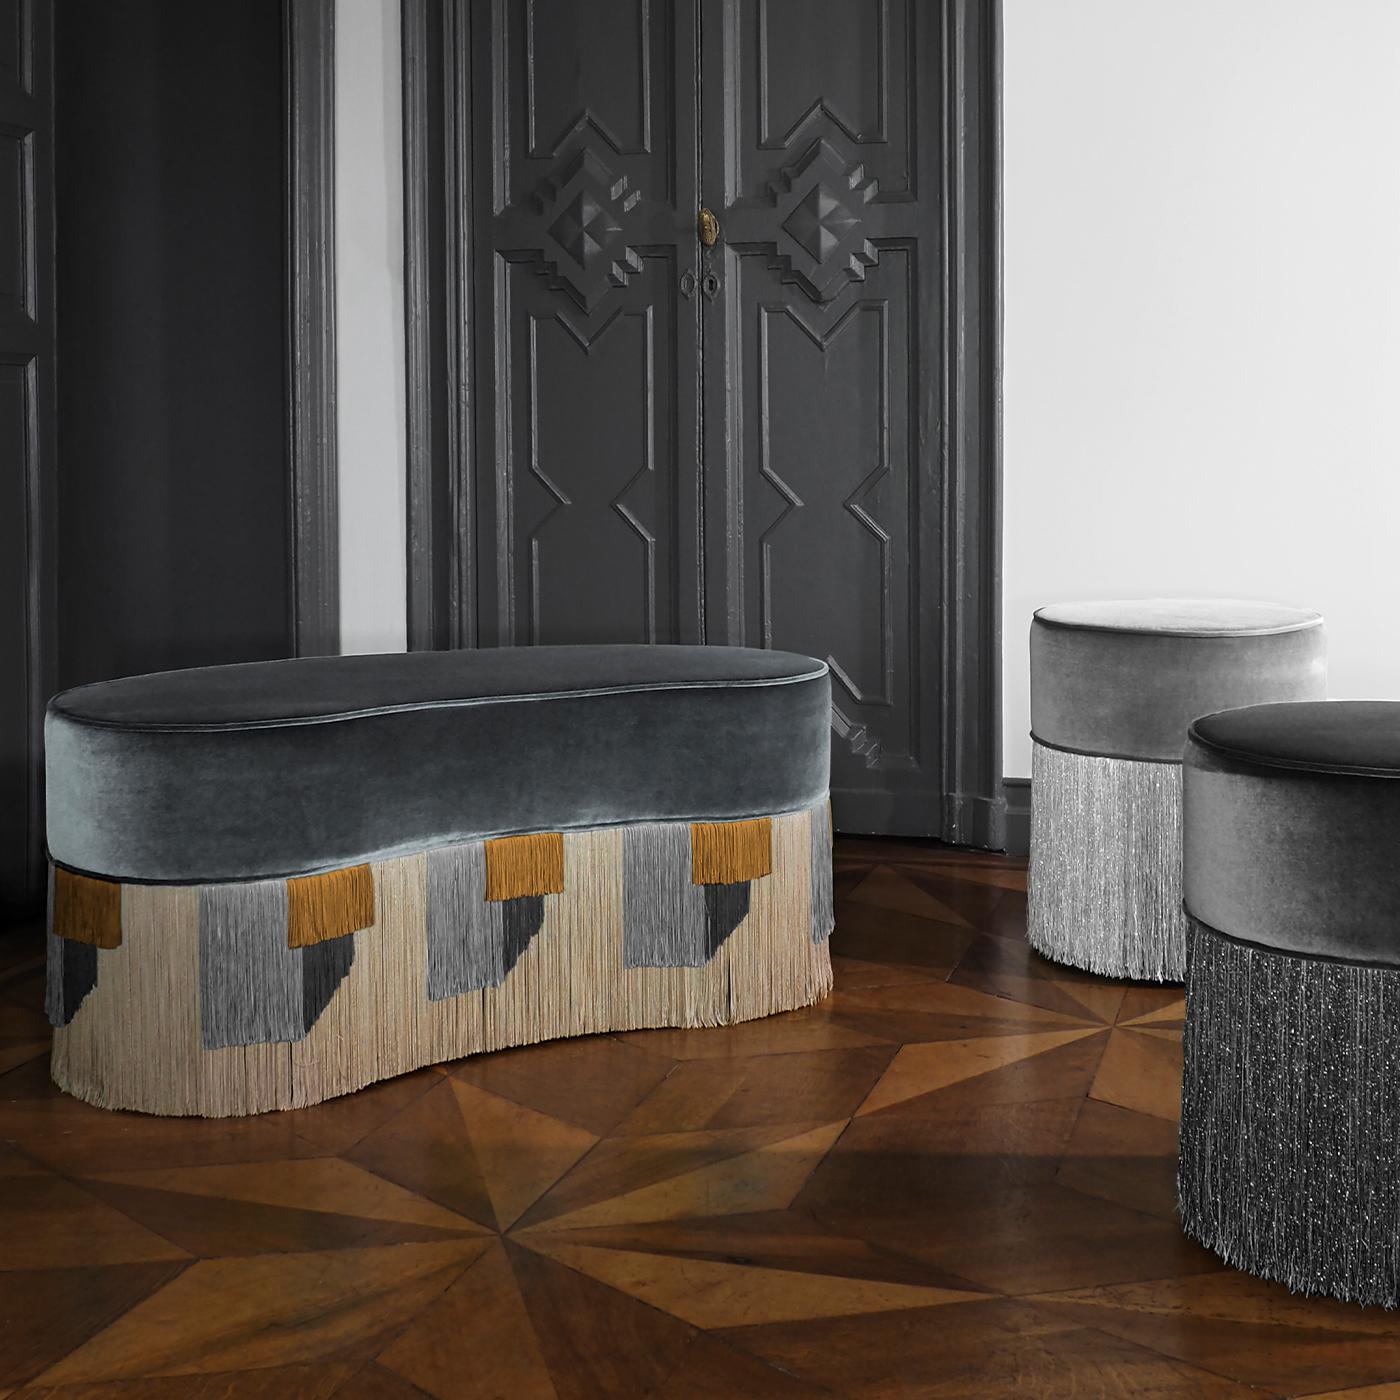 Richly hued colors, simple geometry, and attention to detail are the distinctive features of the Sparkle Collection by Milanese designer Lorenza Bozzoli. A sophisticated, statement-making piece for a bedroom, entryway, or living room, this original